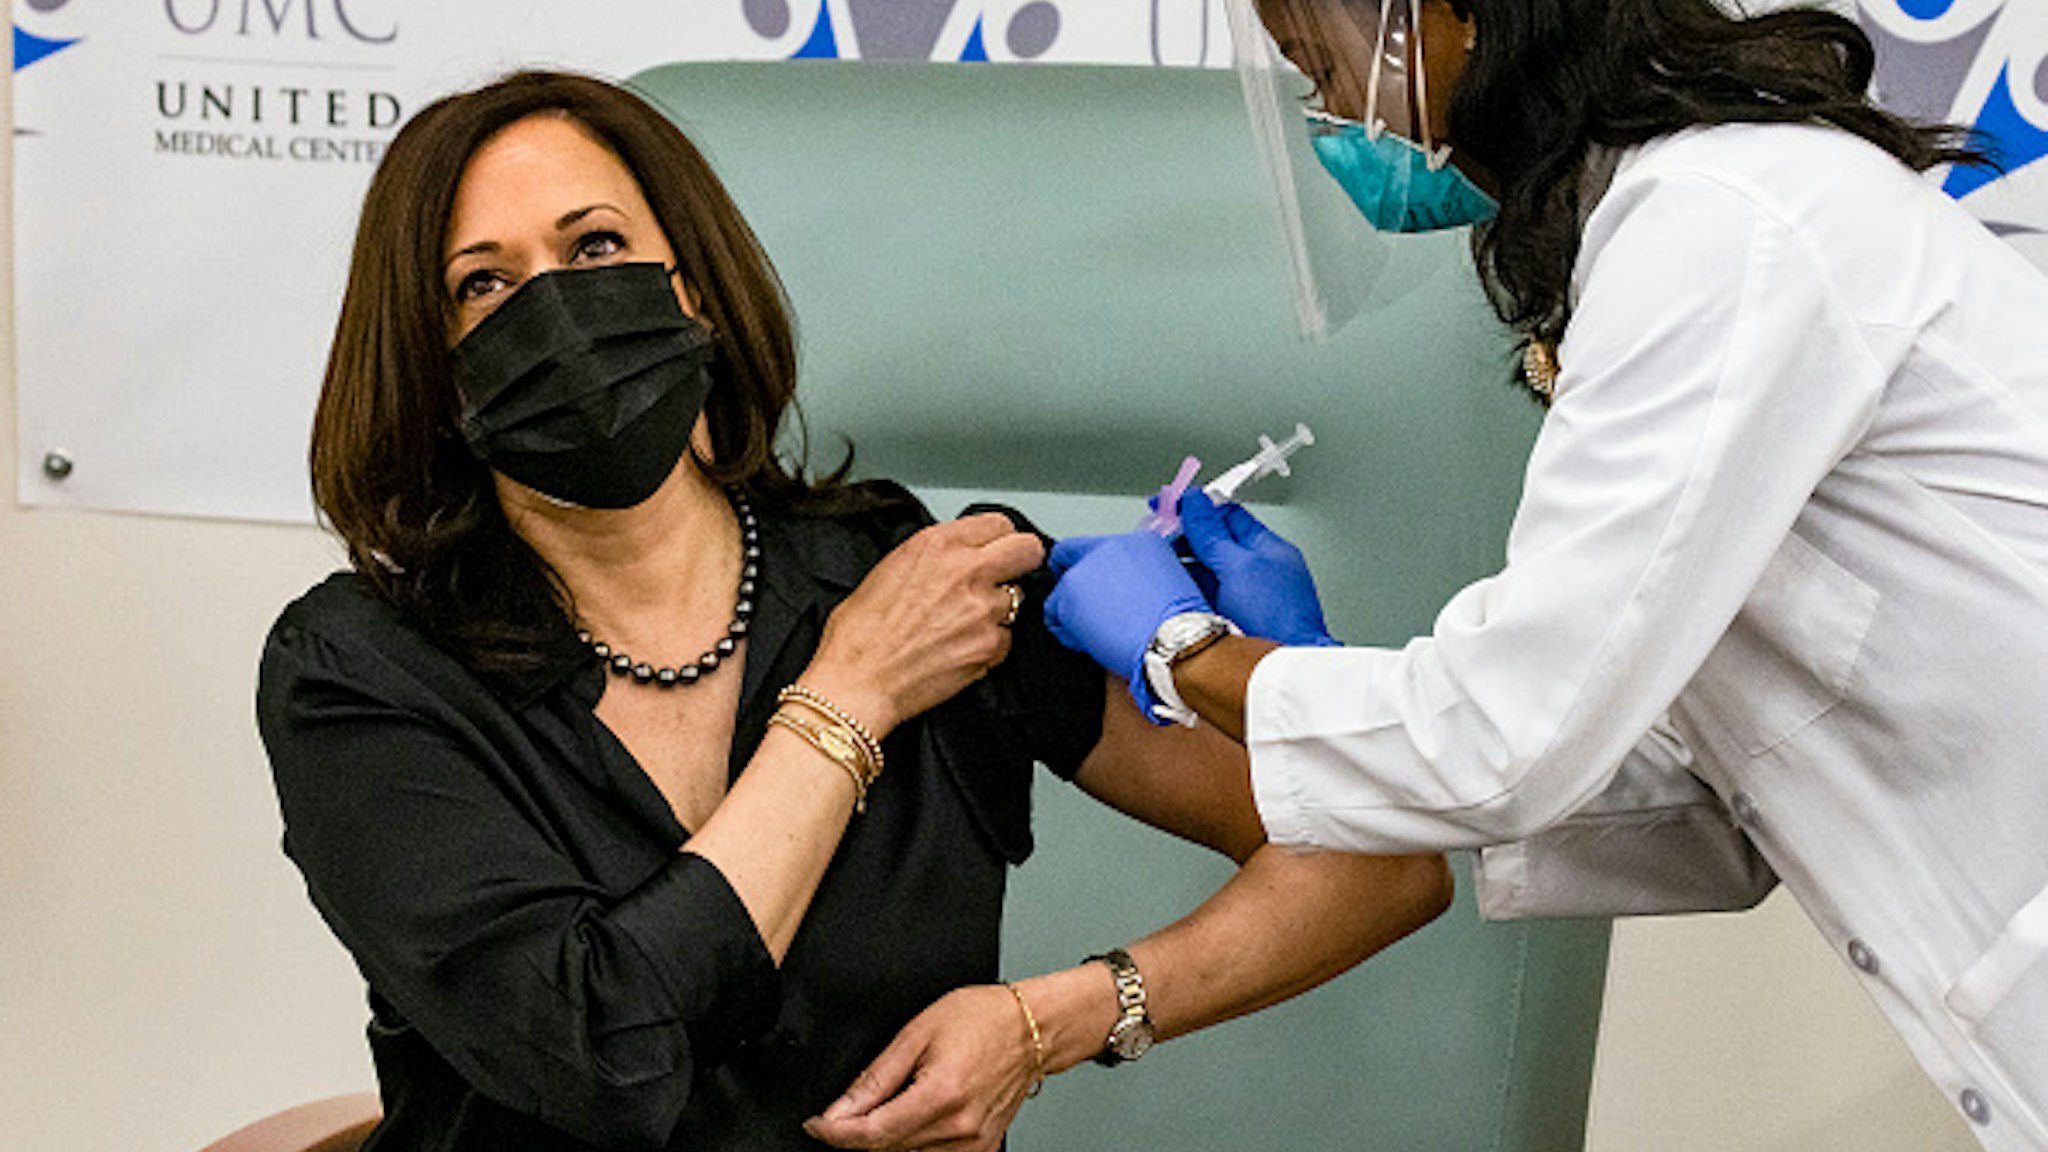 WASHINGTON, DC - DECEMBER 29: Registered Nurse Patricia Cummings administers the Moderna COVID-19 vaccine to Vice President-elect Kamala Harris at the United Medical Center on December 29, 2020 in Washington, DC. This is the Vice President-elect's first of two doses of the Moderna vaccine which was given emergency use authorization by the Food and Drug Administration less than two weeks ago. (